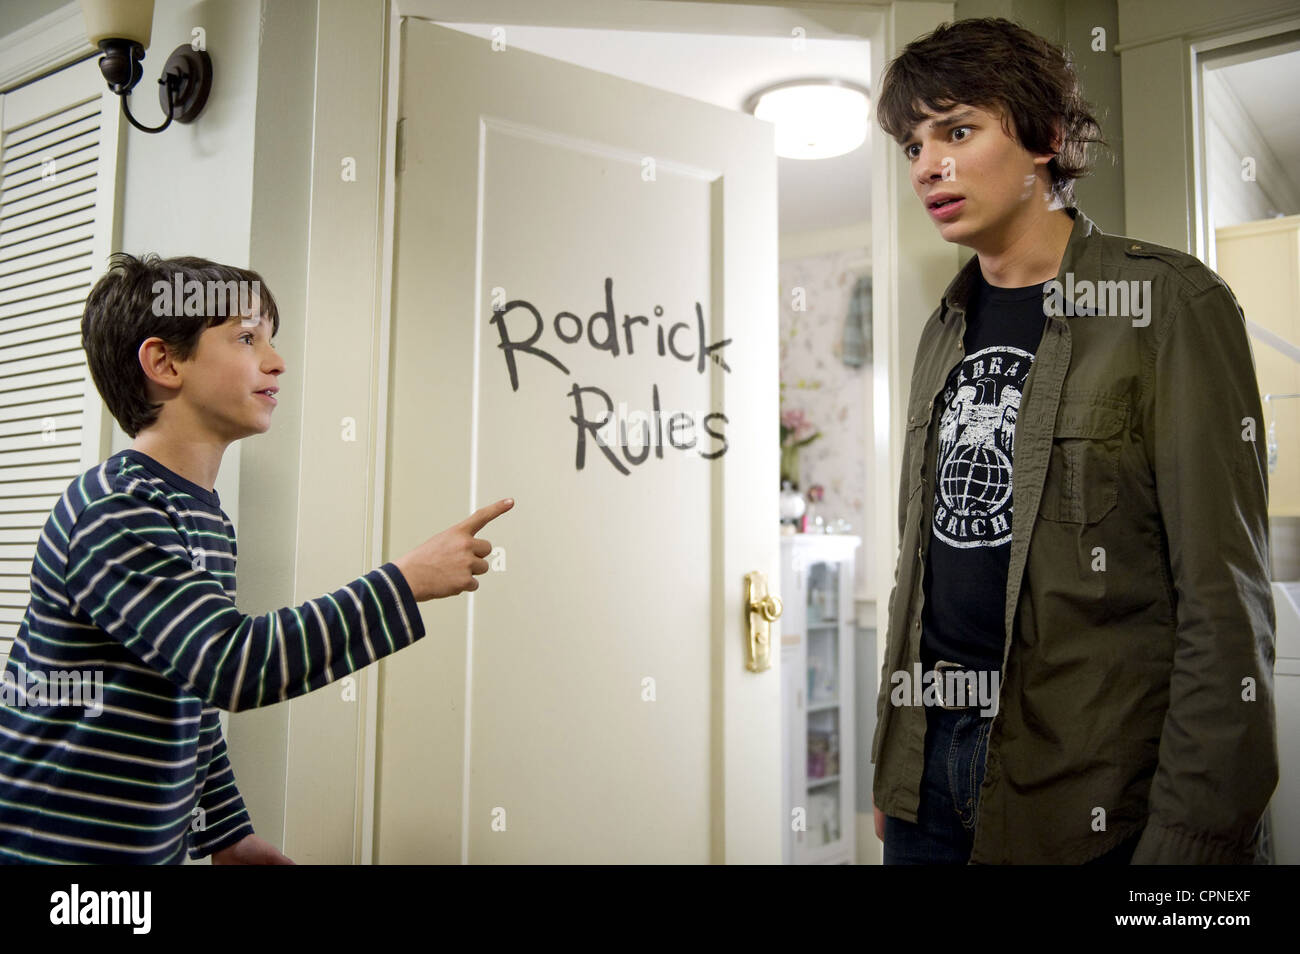 Diary of a Wimpy Kid: Rodrick Rules' Trailer Drops